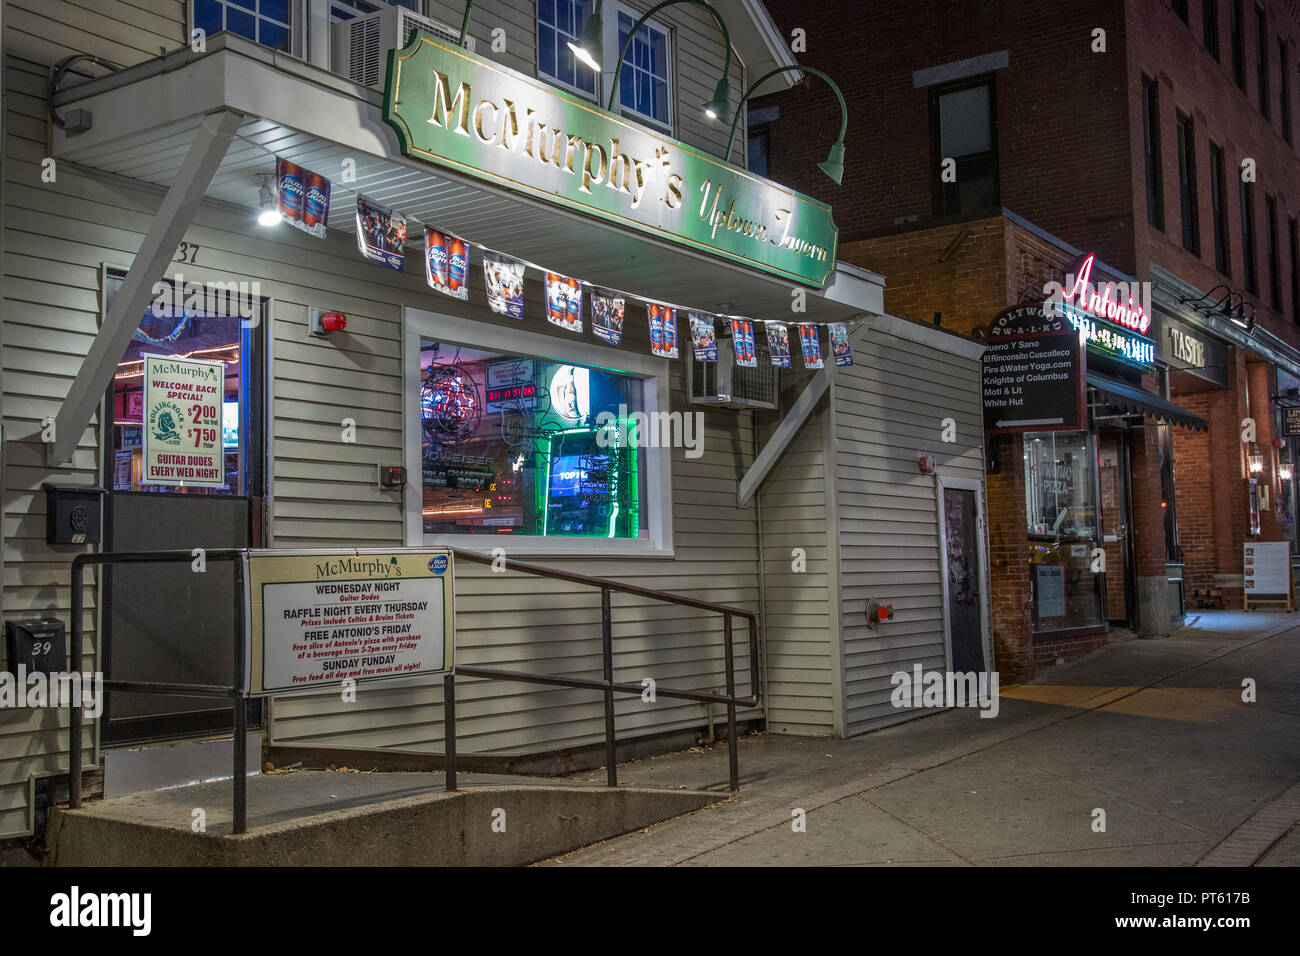 McMurphy's Uptown Taverne in Amherst, MA Stockfoto